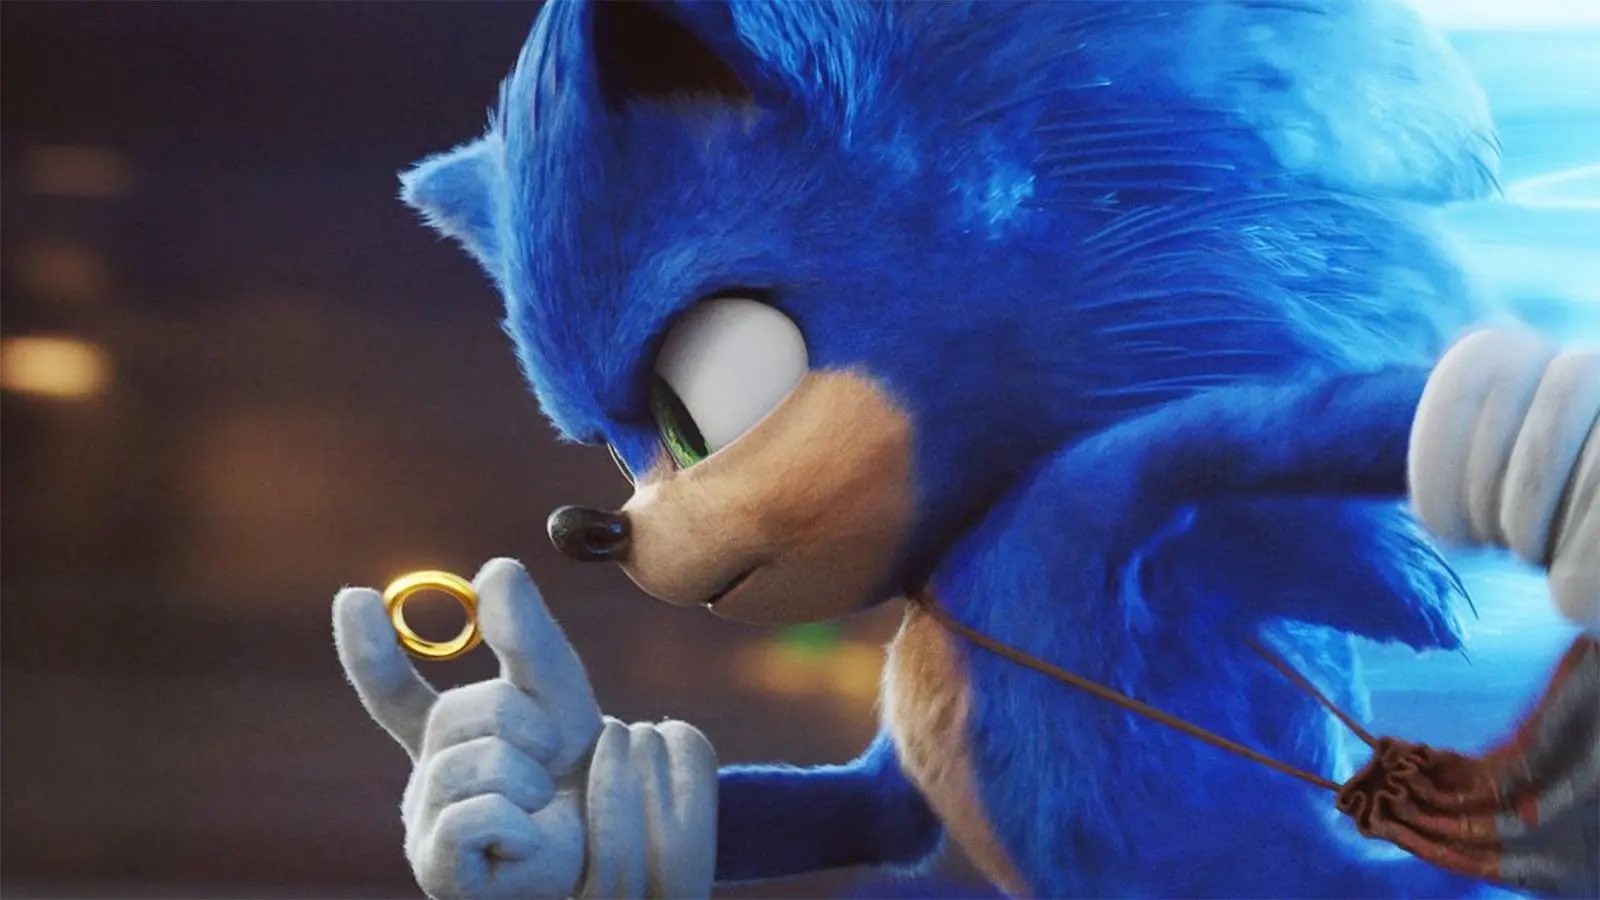 RUMOR: First Sonic The Hedgehog 3 Teaser to Debut at ShowEast 2023